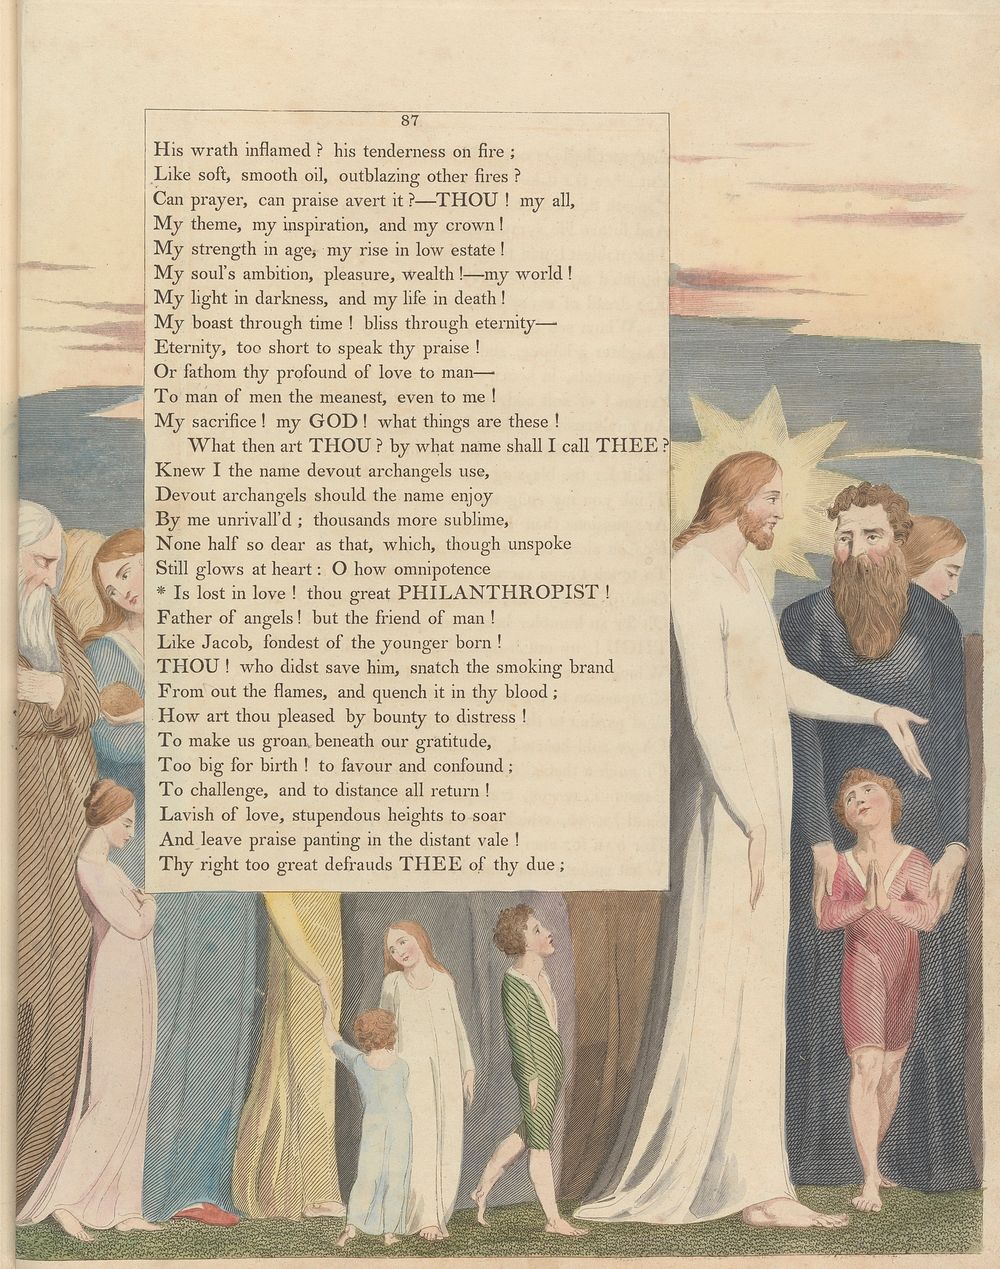 Young's Night Thoughts, Page 87, "Is lost in love! thou great Philanthropist" by William Blake.